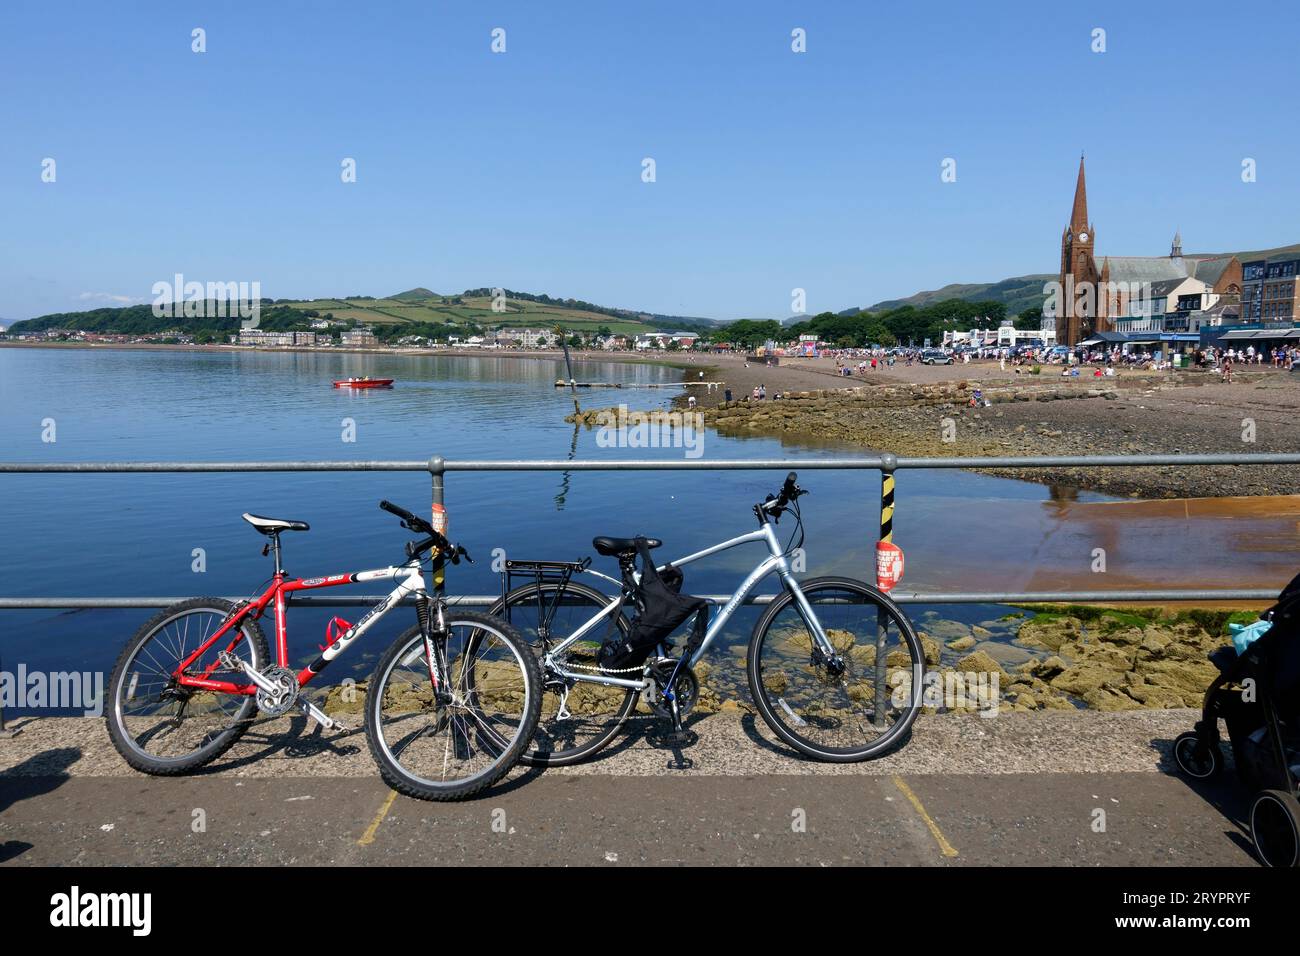 Bicycles in Largs, Ayrshire, part of the queue waiting for the next ferry from Largs to Cumbrae. It is a popular Scottish island for cycling round. Stock Photo